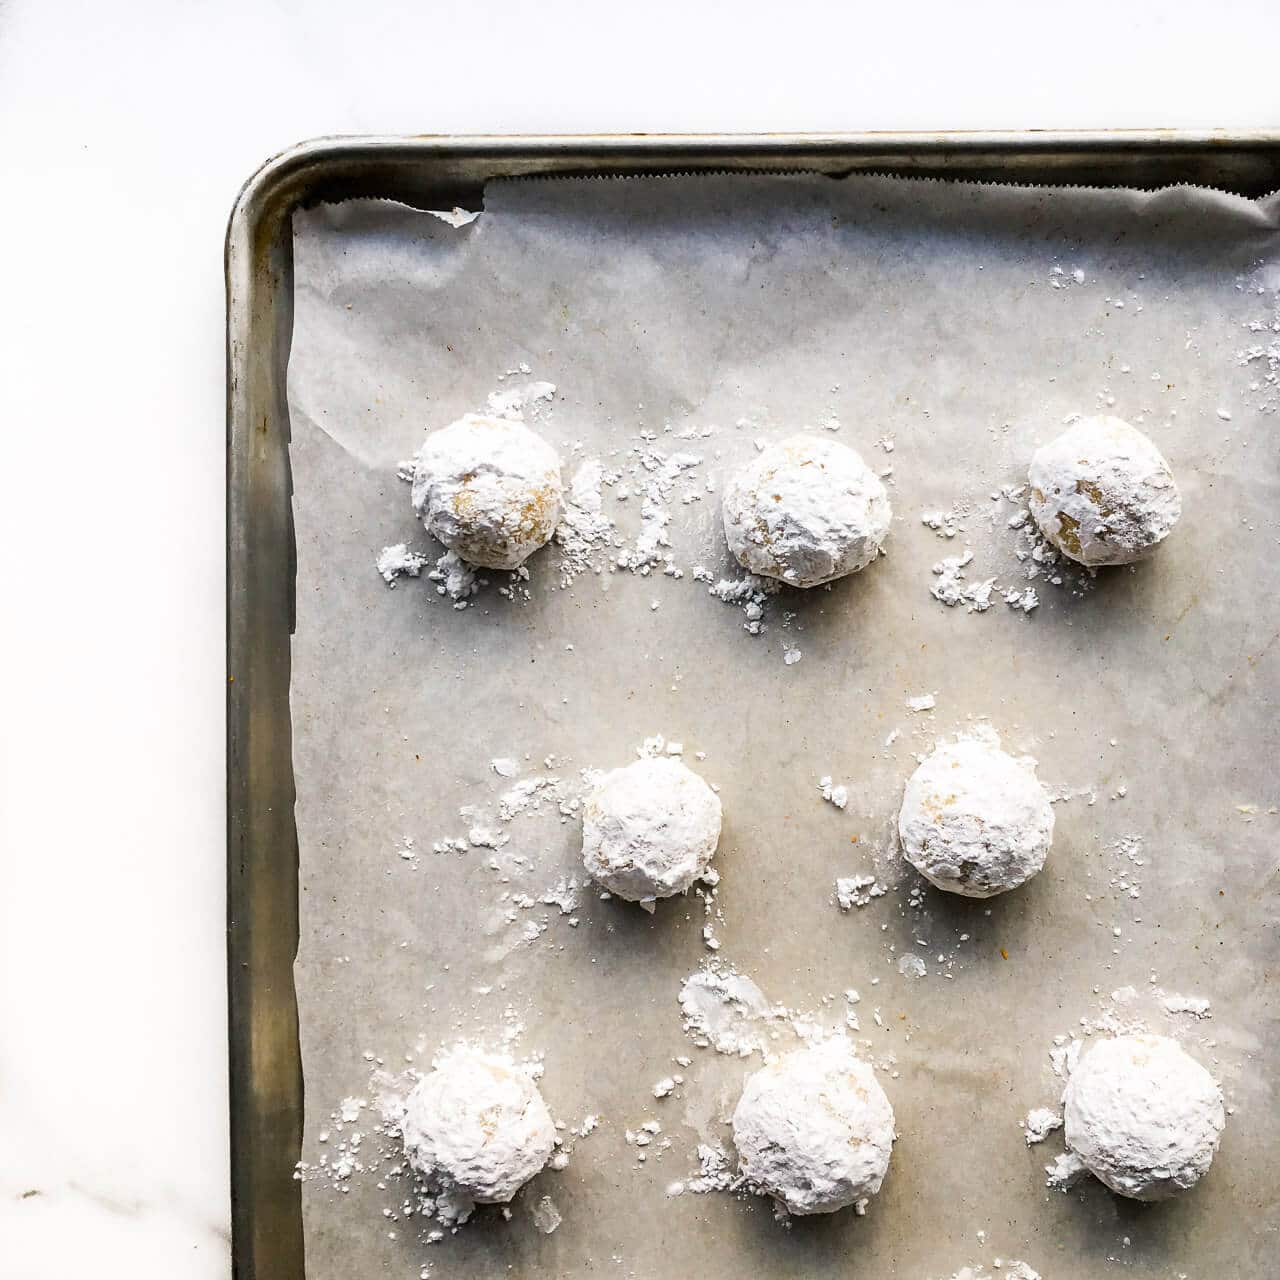 Balls of lemon ricotta cookie dough are rolled in icing sugar before baking on a parchment-lined sheet pan to give them a cracked finish.